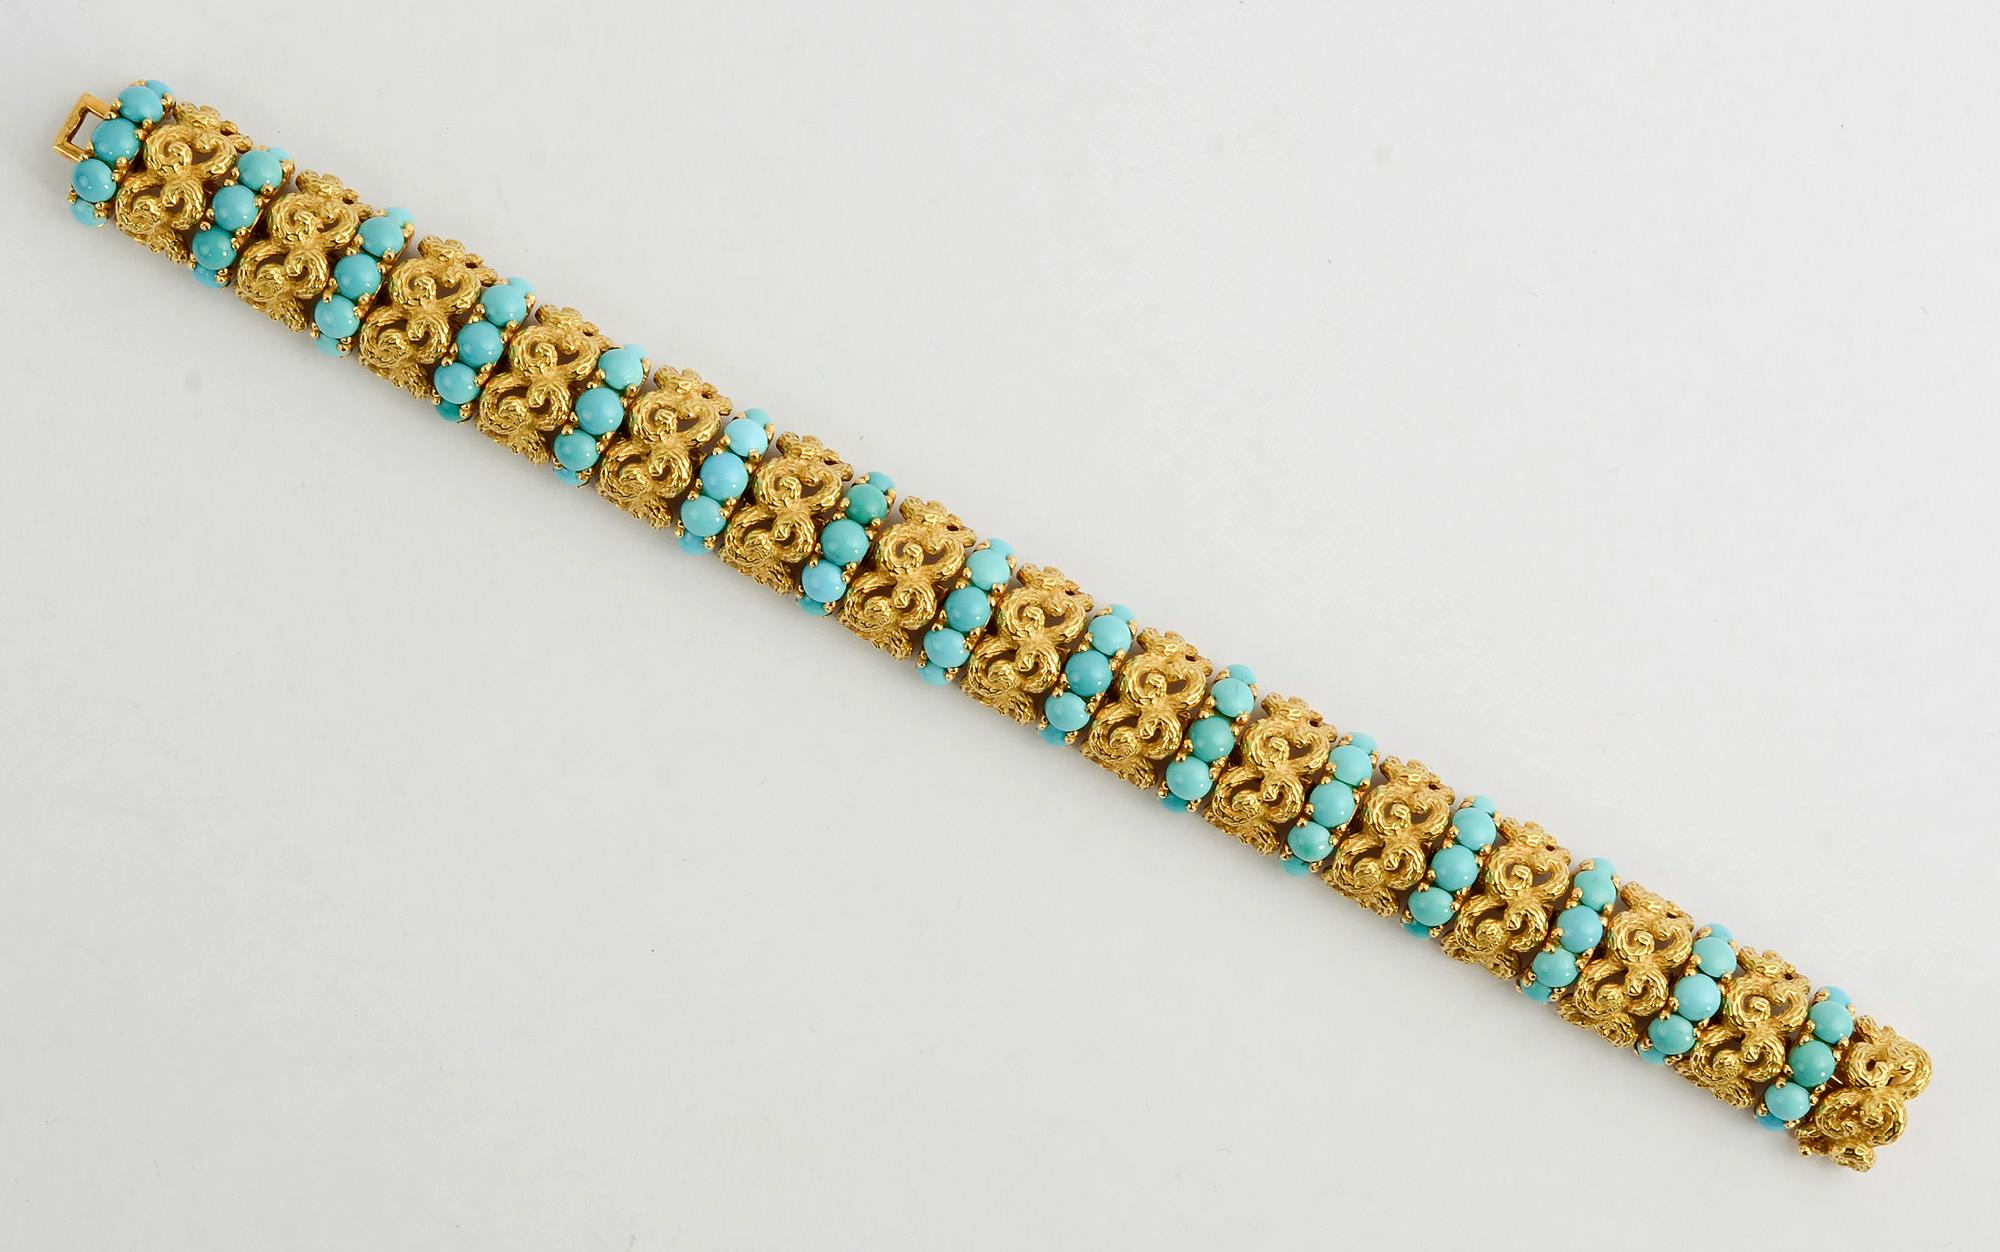 Finely made bracelet by Pomellato of intricately intertwined textured links. Each group of gold links is separated by a row of five beautifully colored natural turquoise stones. The bracelet has a graceful arch. It is 7 3/8 inches in length with a